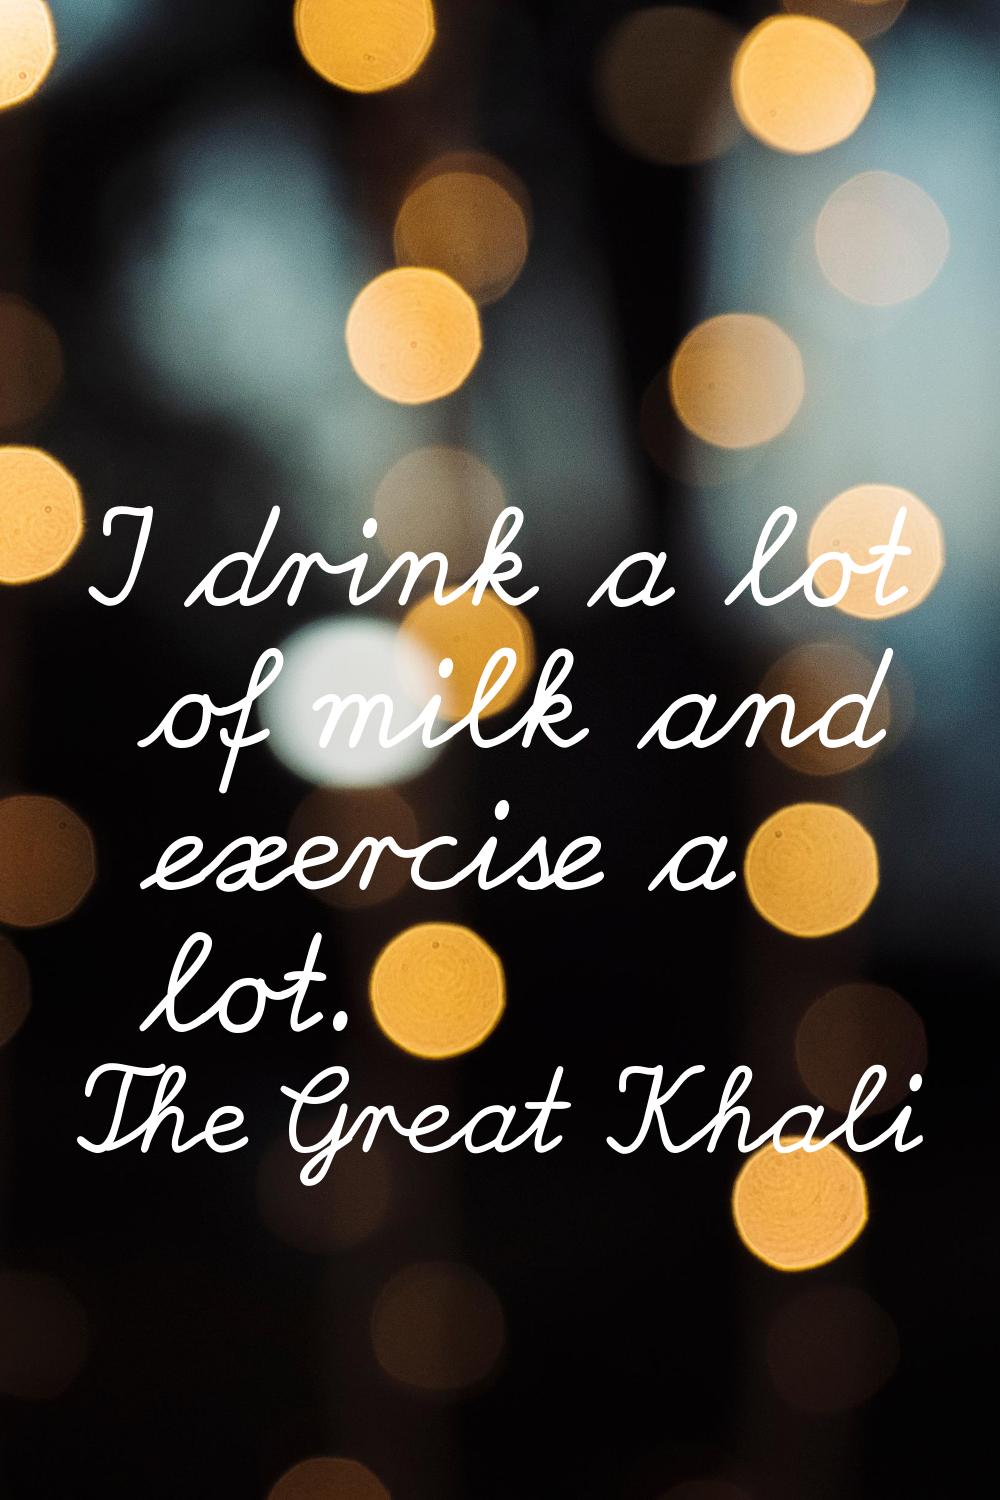 I drink a lot of milk and exercise a lot.